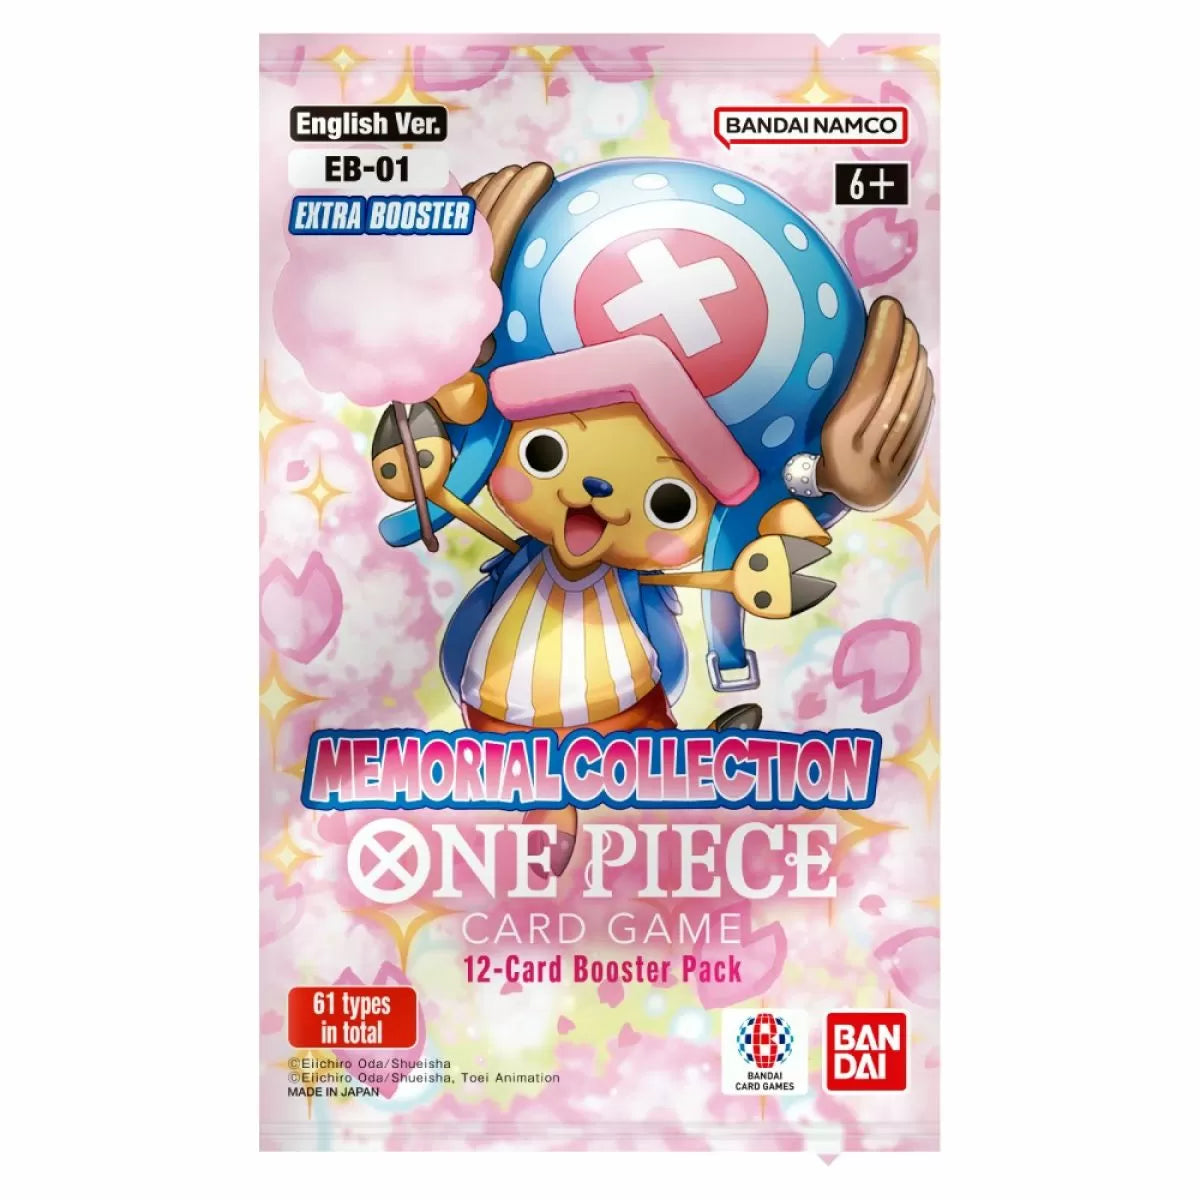 One Piece TCG - Memorial Collection Extra Booster Pack (EB-01) *Sealed*